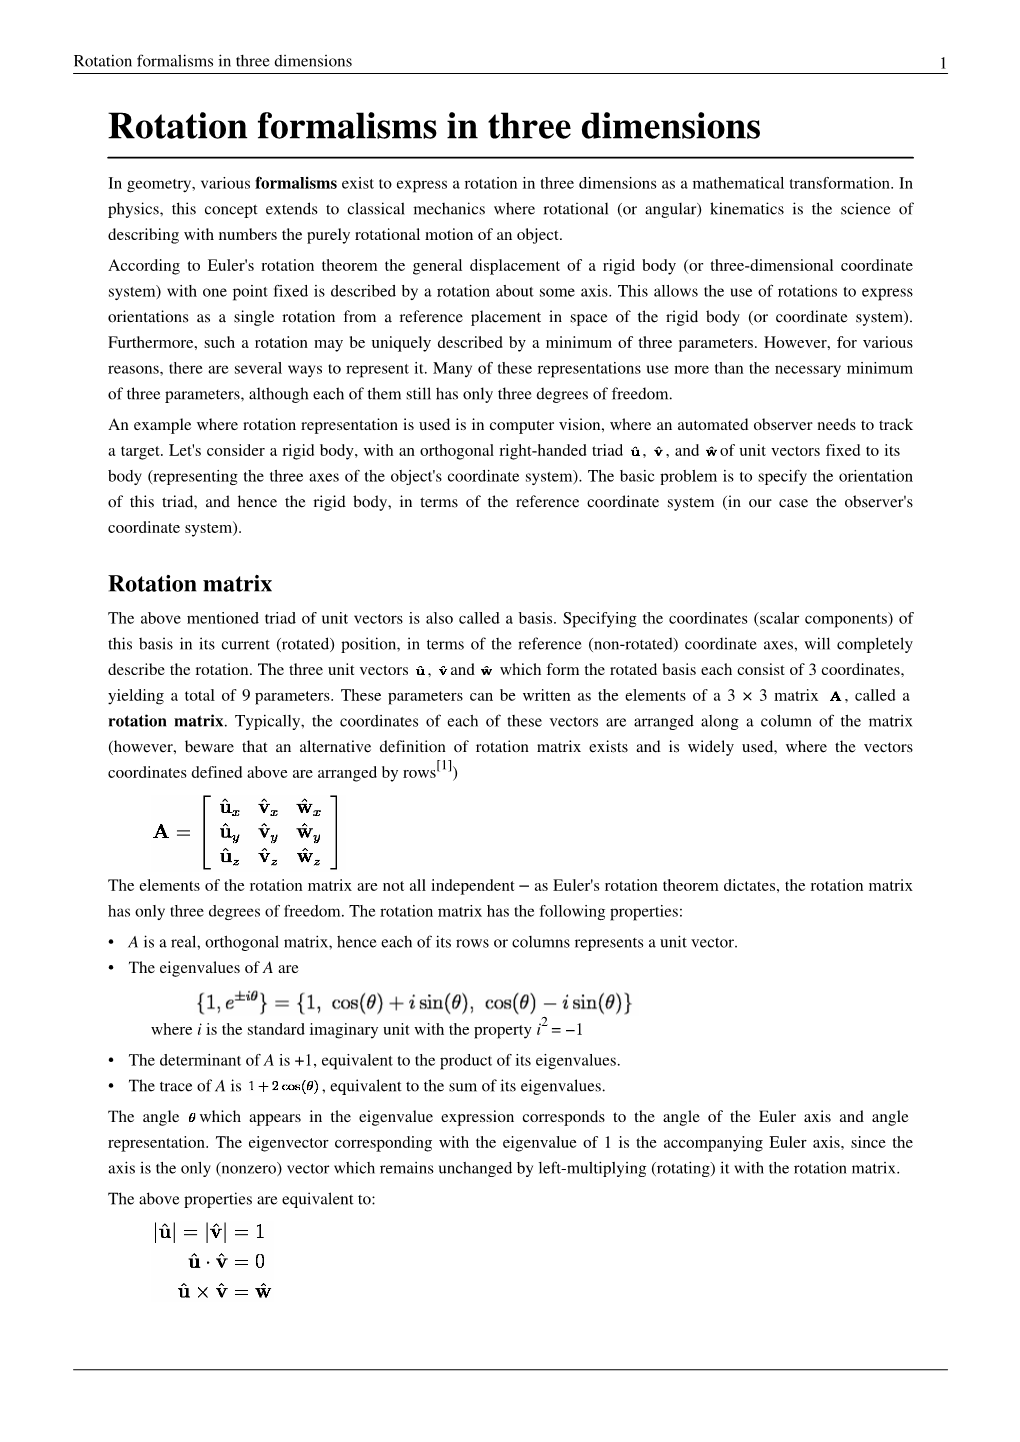 Rotation Formalisms in Three Dimensions 1 Rotation Formalisms in Three Dimensions